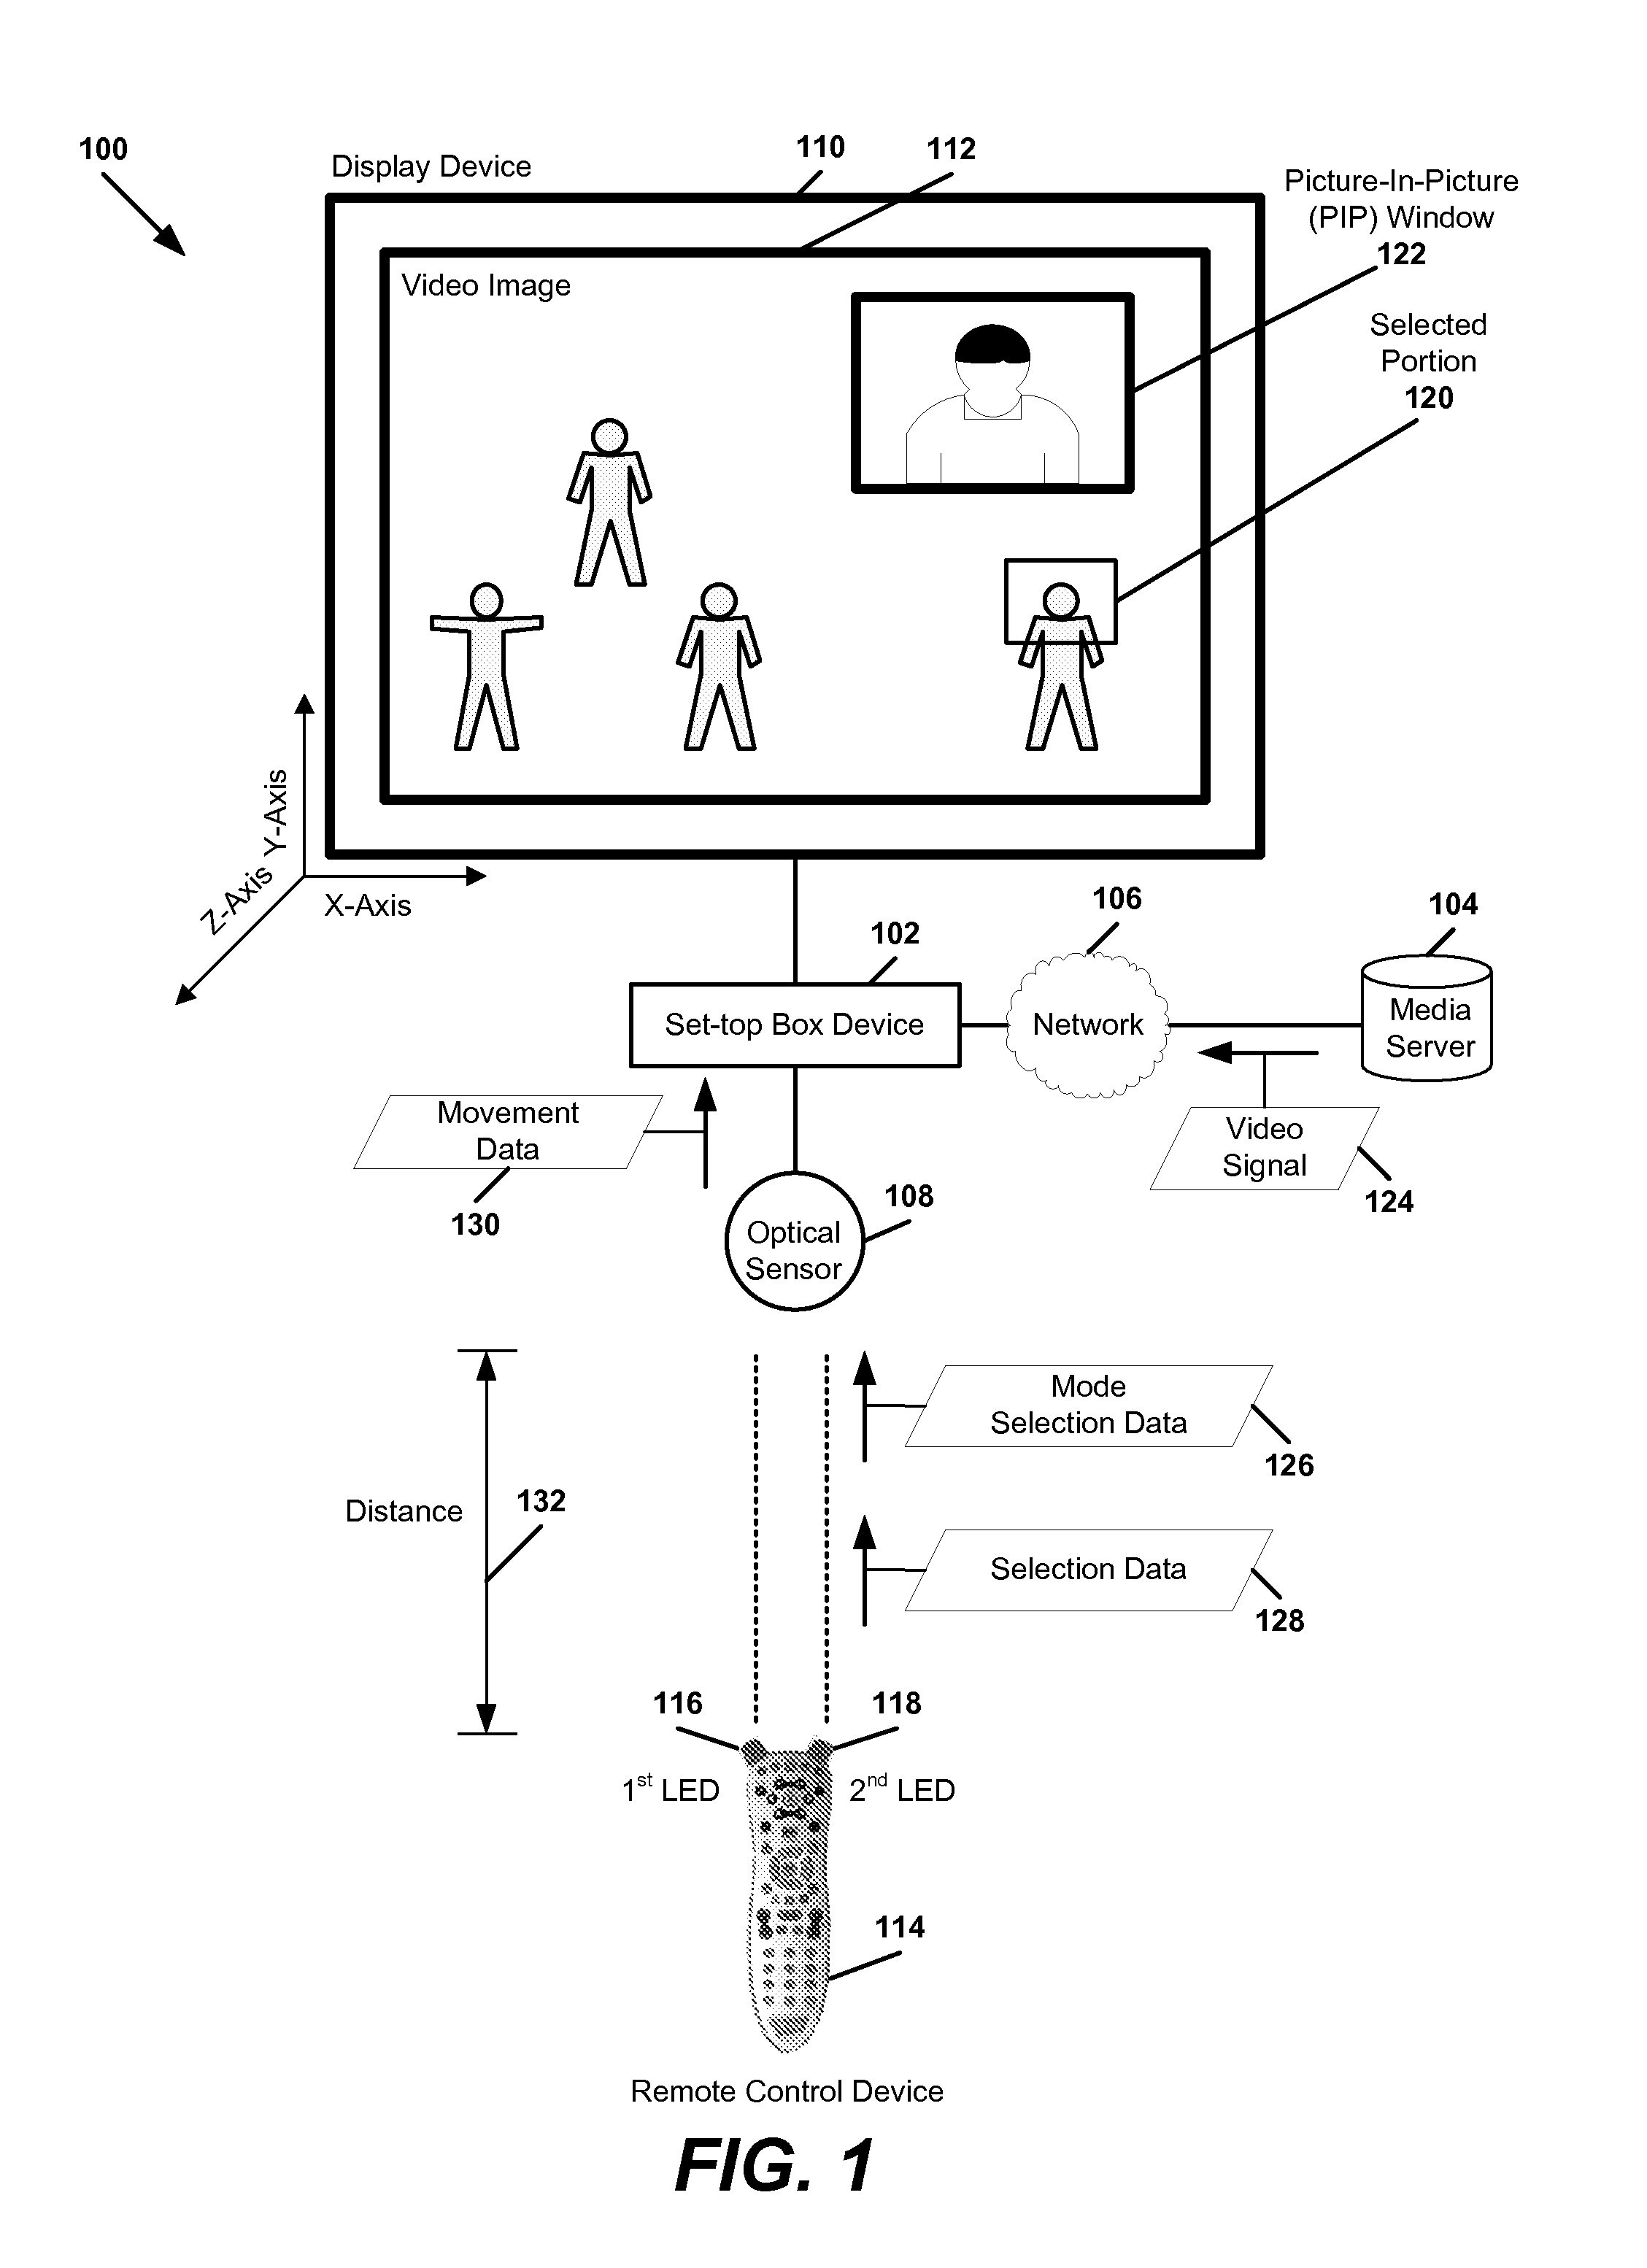 System and Method to Control and Present a Picture-In-Picture (PIP) Window Based on Movement Data